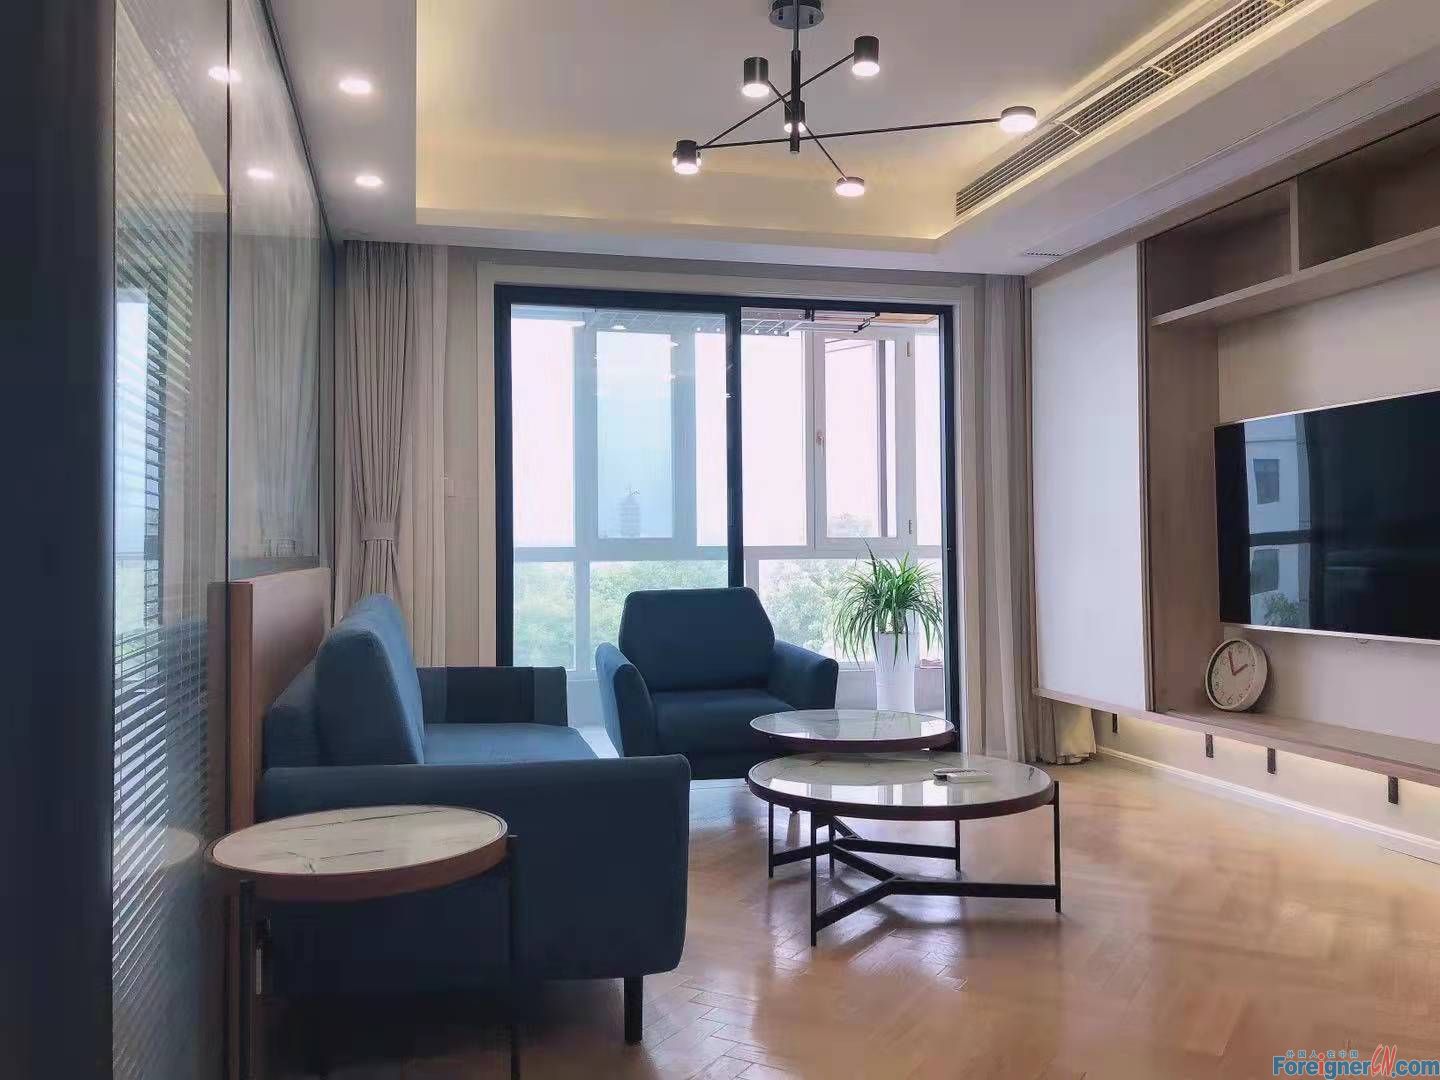 Luxurious duplex in old twon Suzhou | 4 roons and 3 baths; 140sqms | Brand new/heating/Central A/C/ Bathtub | Close to Suzhou Gardens; Suzhou Railway Station and Metro line2&4